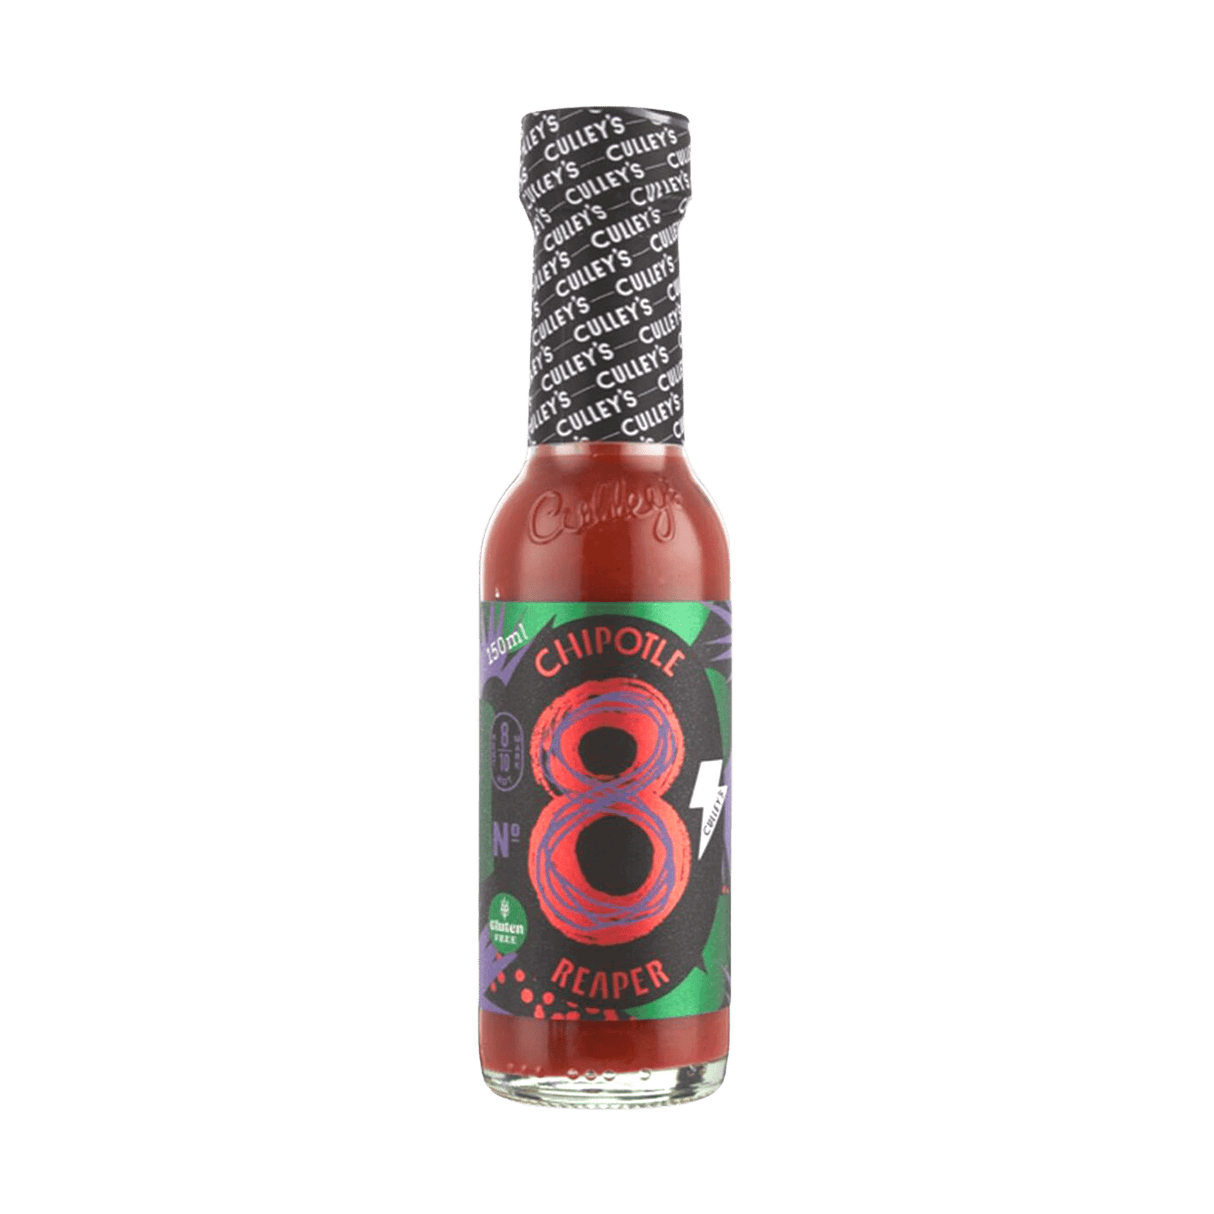 Culley's No. 8 Chipotle Reaper Hot Sauce